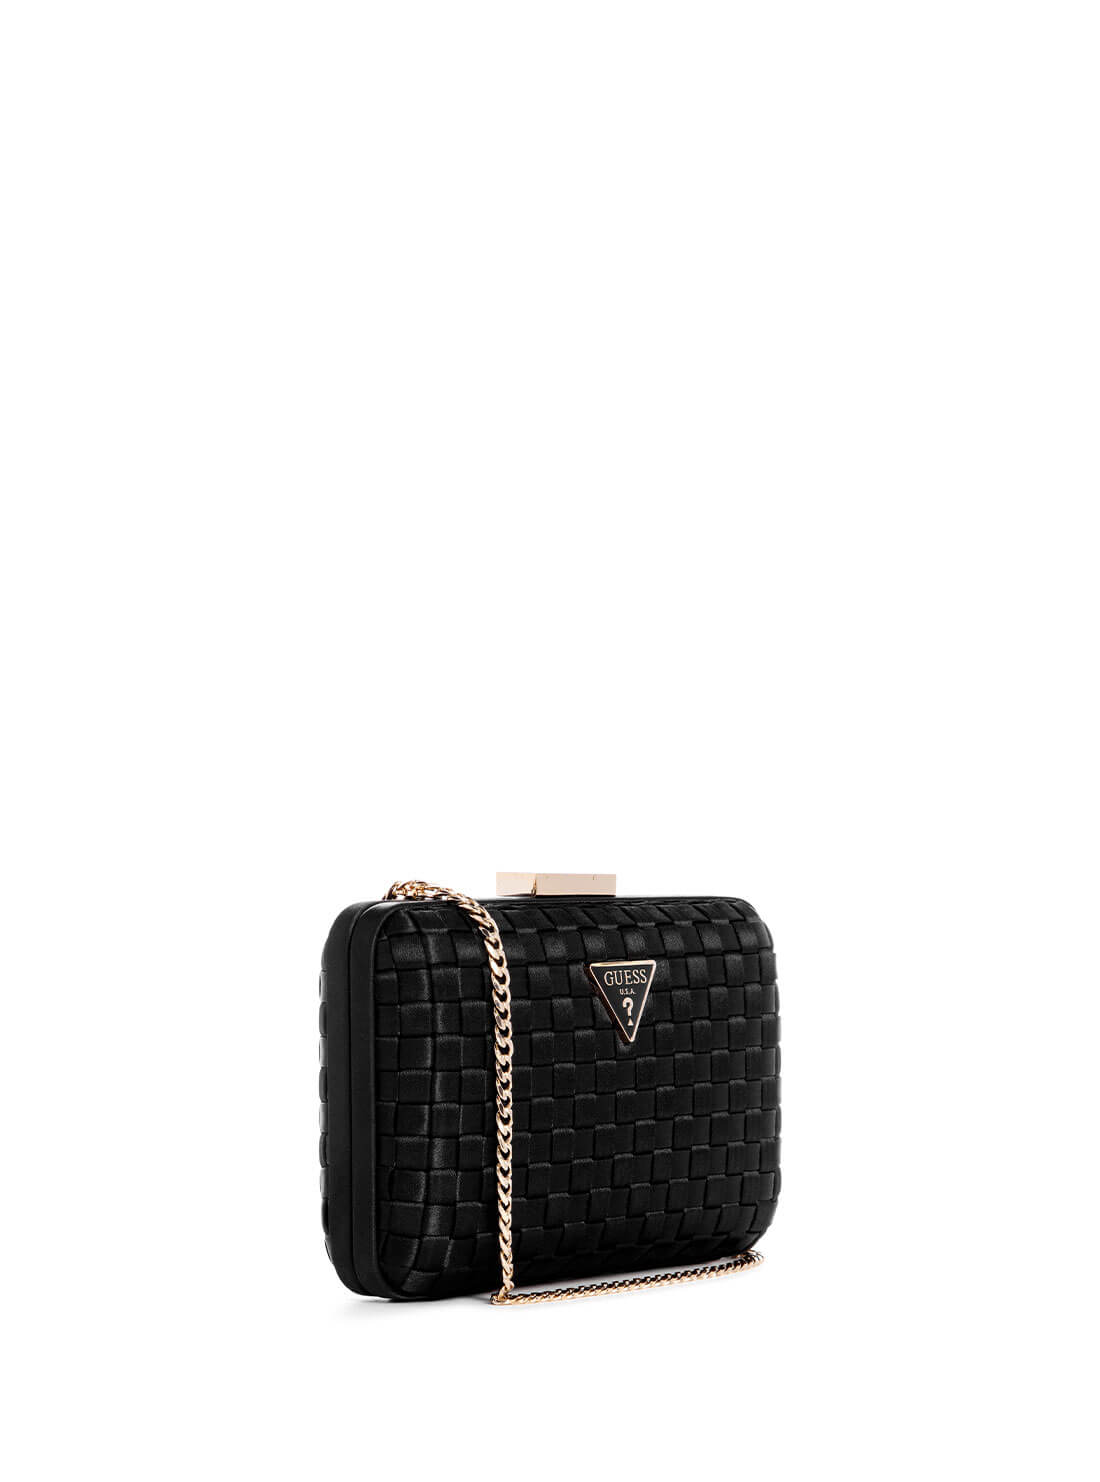 GUESS Black Twiller Minaudiere Clutch Bag side view